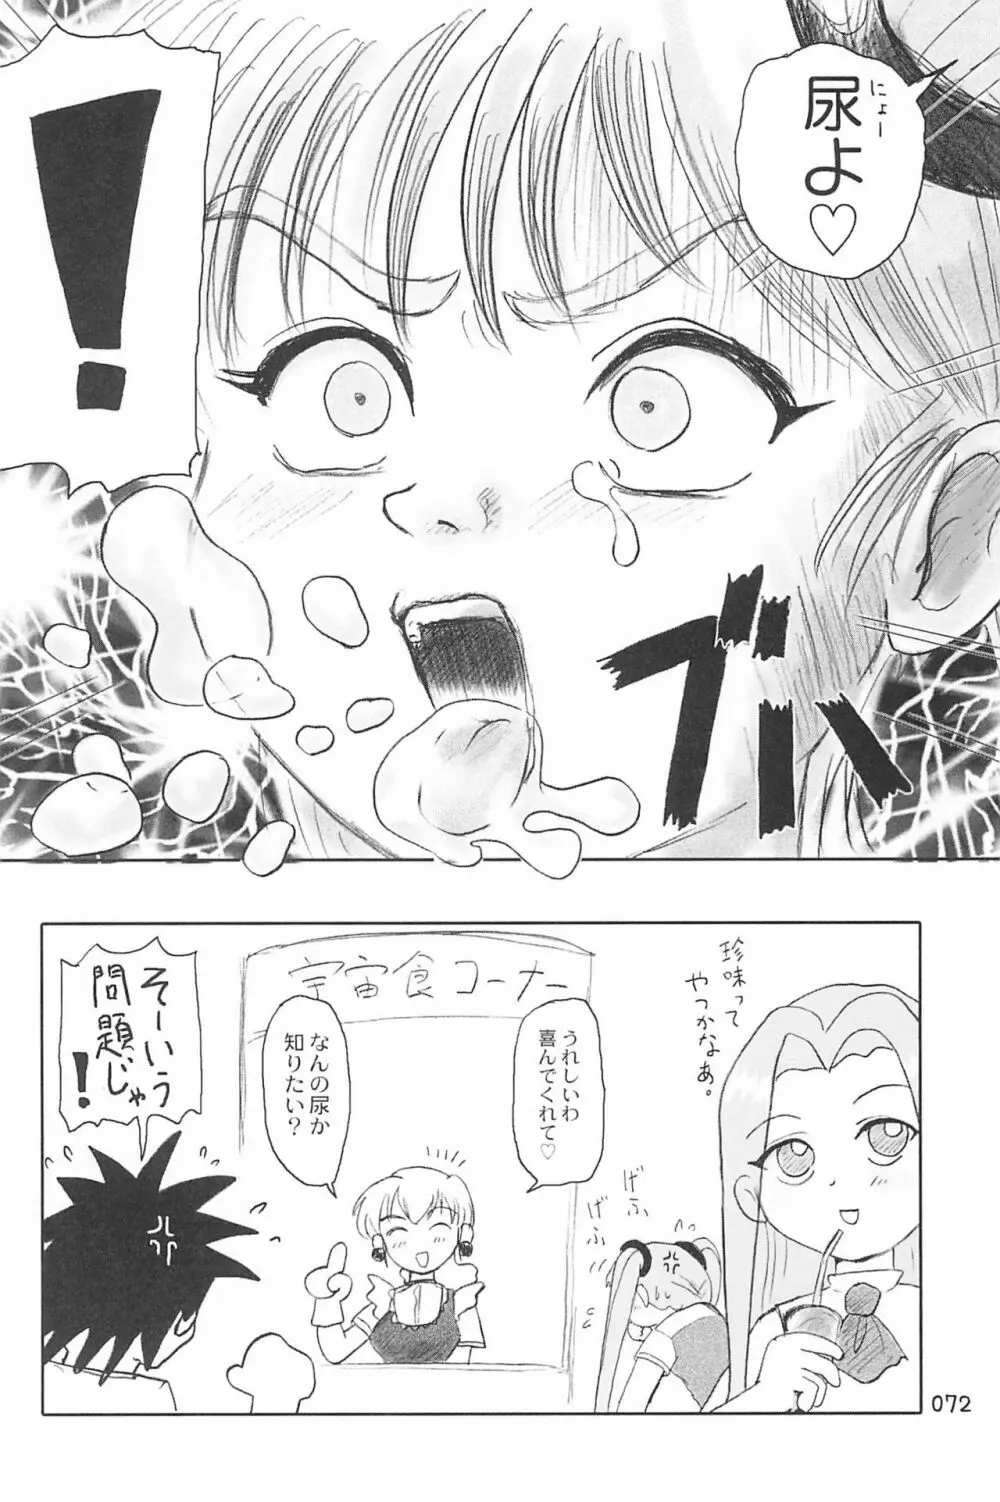 ND-special Volume 4 72ページ